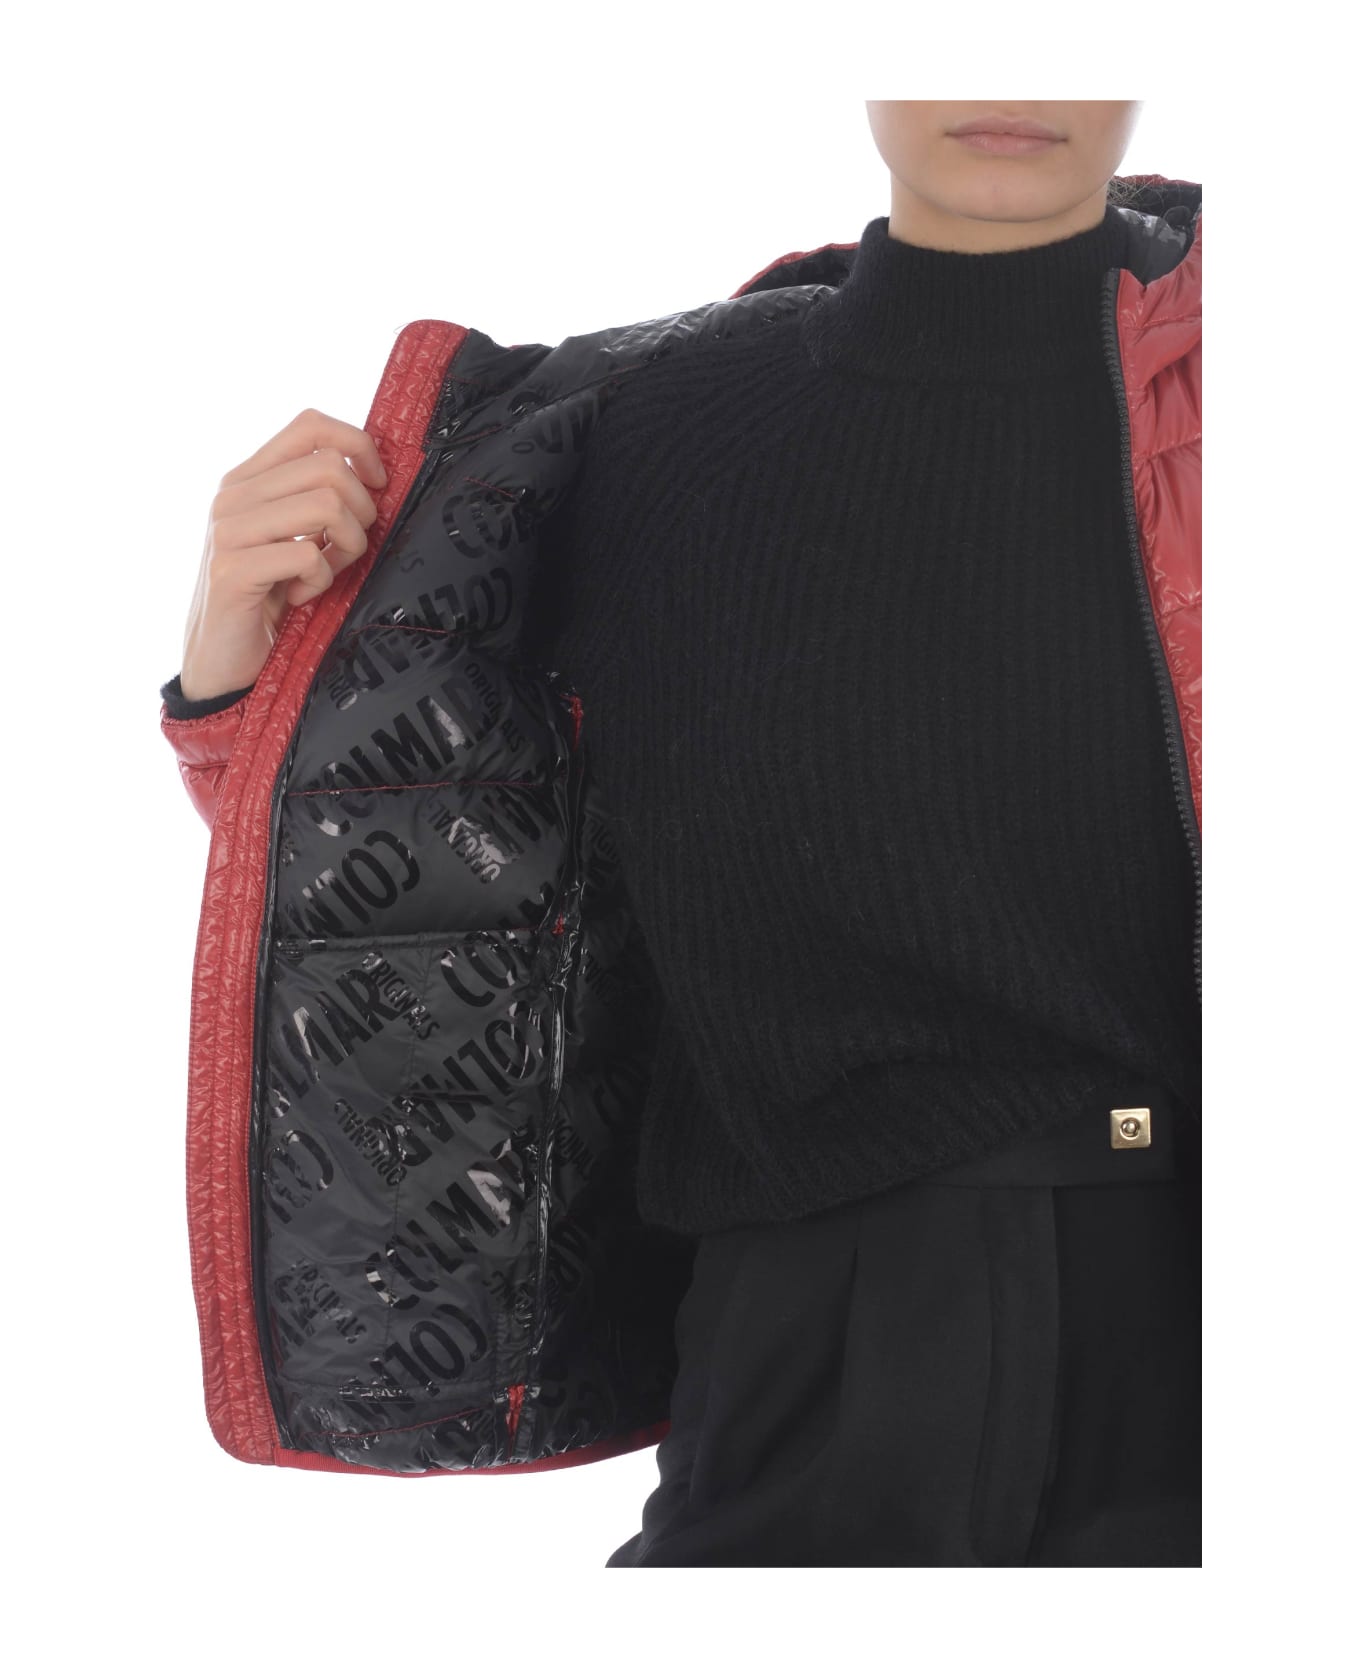 Colmar Originals Short Down Jacket In Shiny Quilted Nylon - Rosso